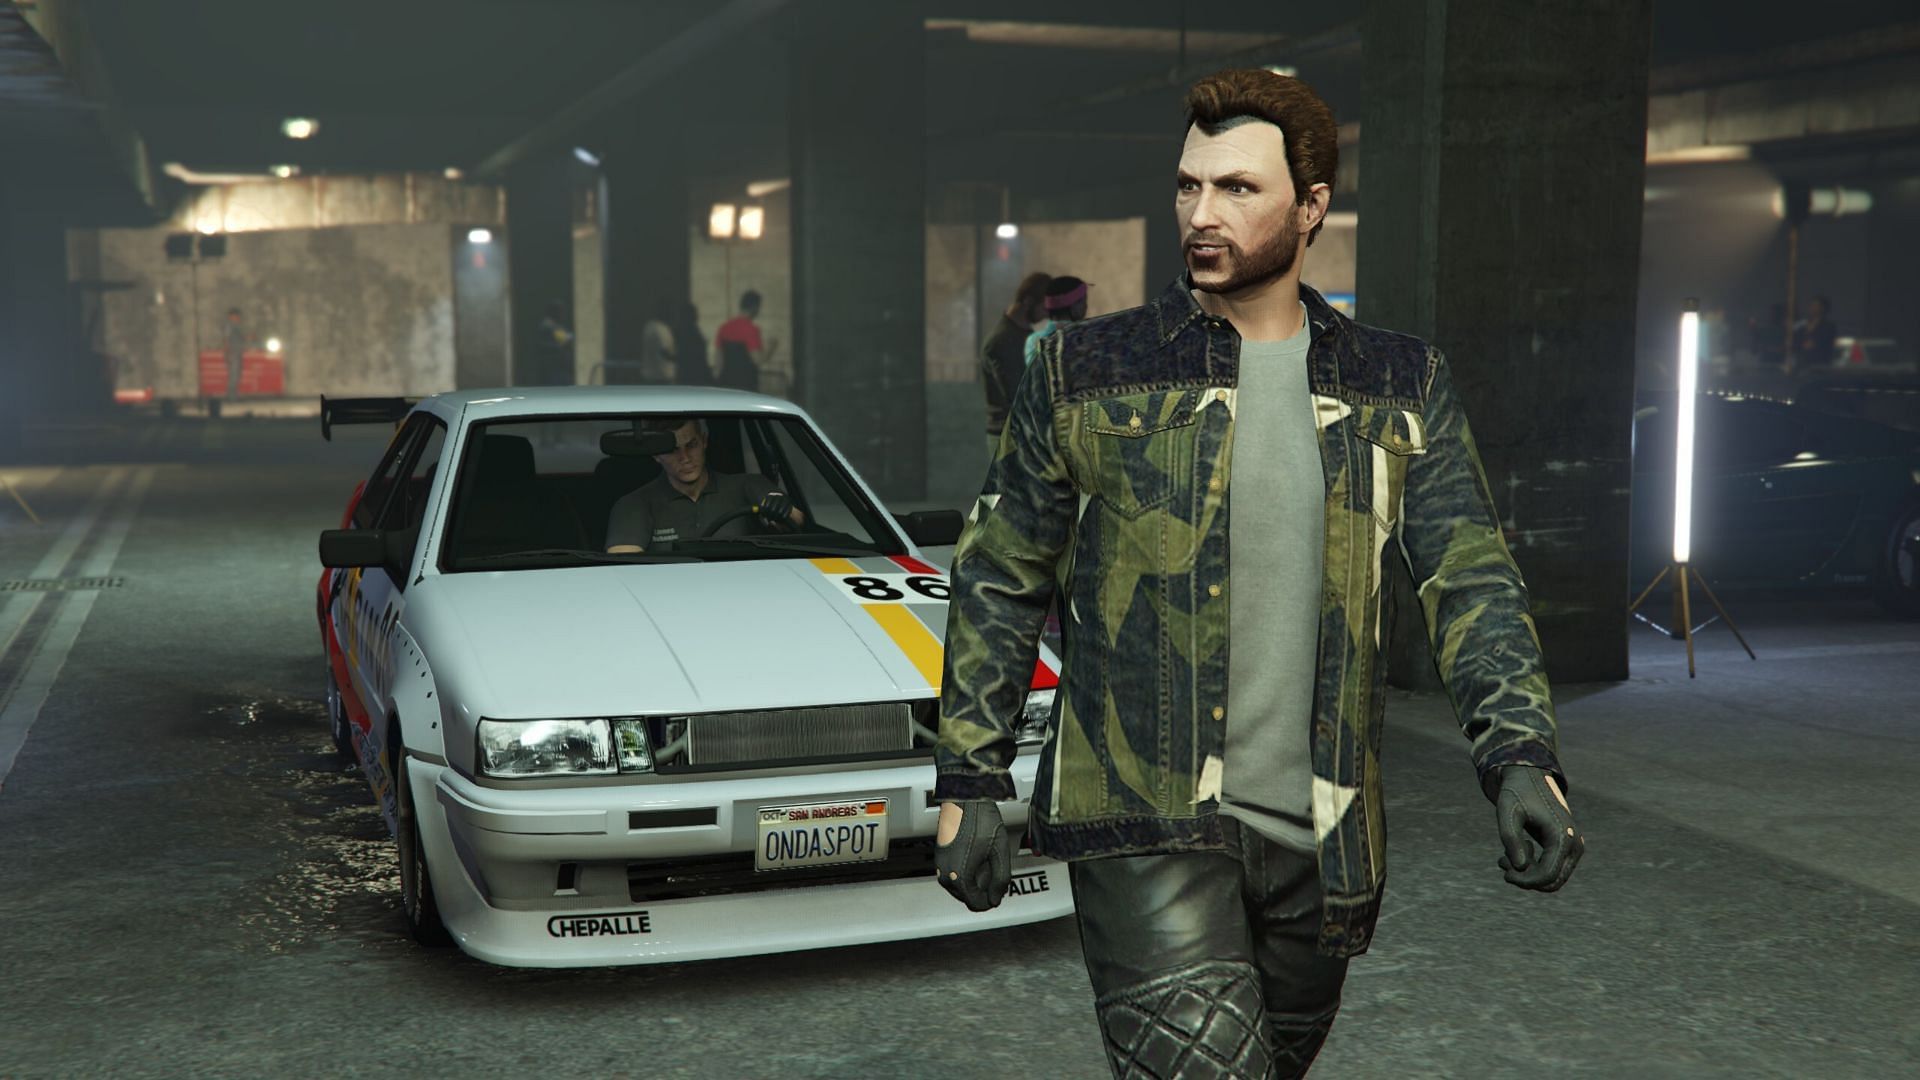 GTA Online players should play Robbery Contracts this week to get rich (Image via Rockstar Games)